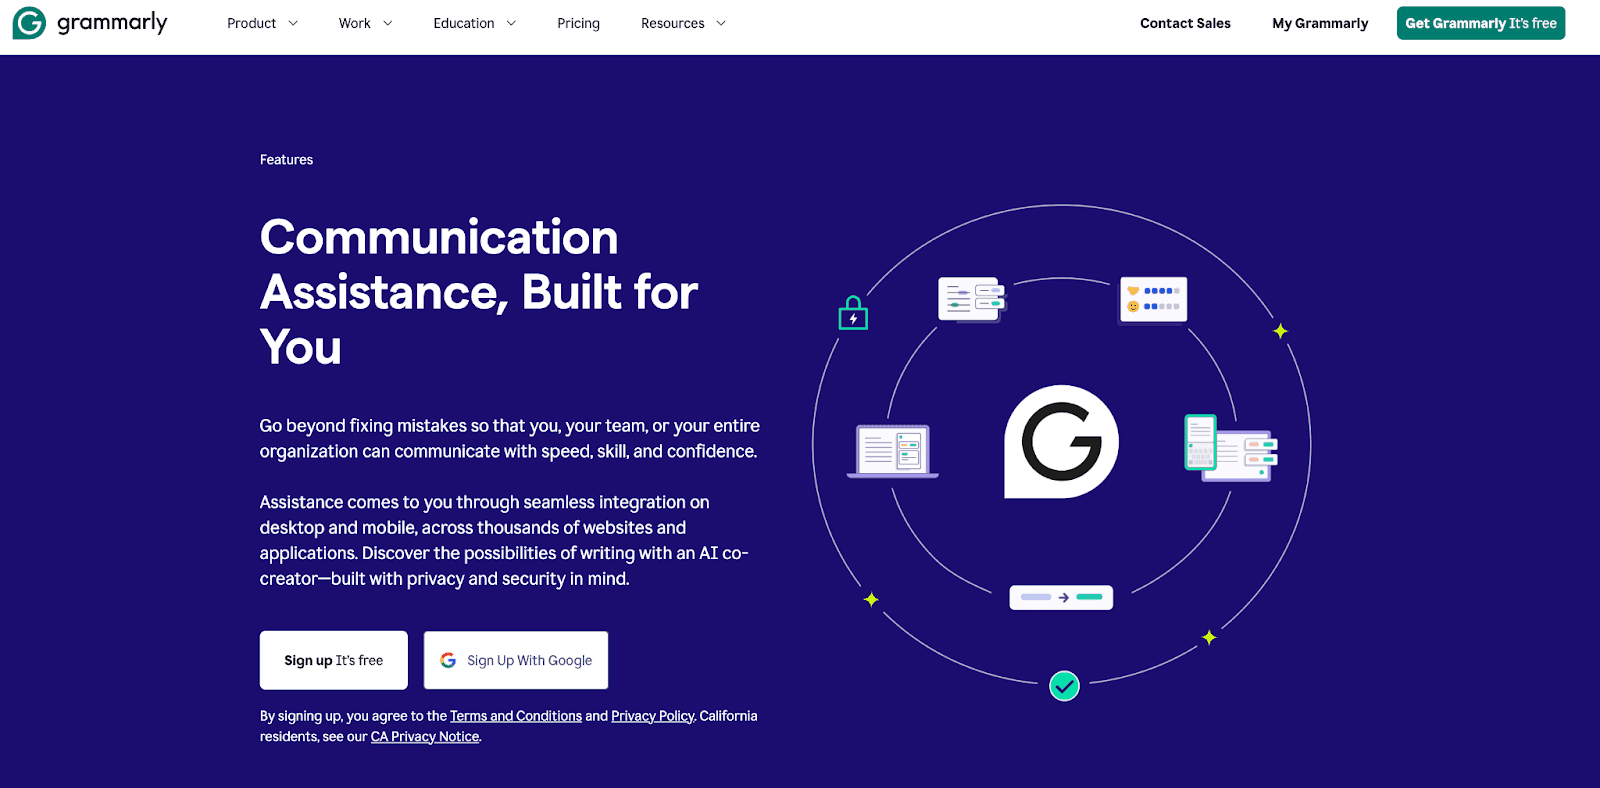 Grammerly homepage